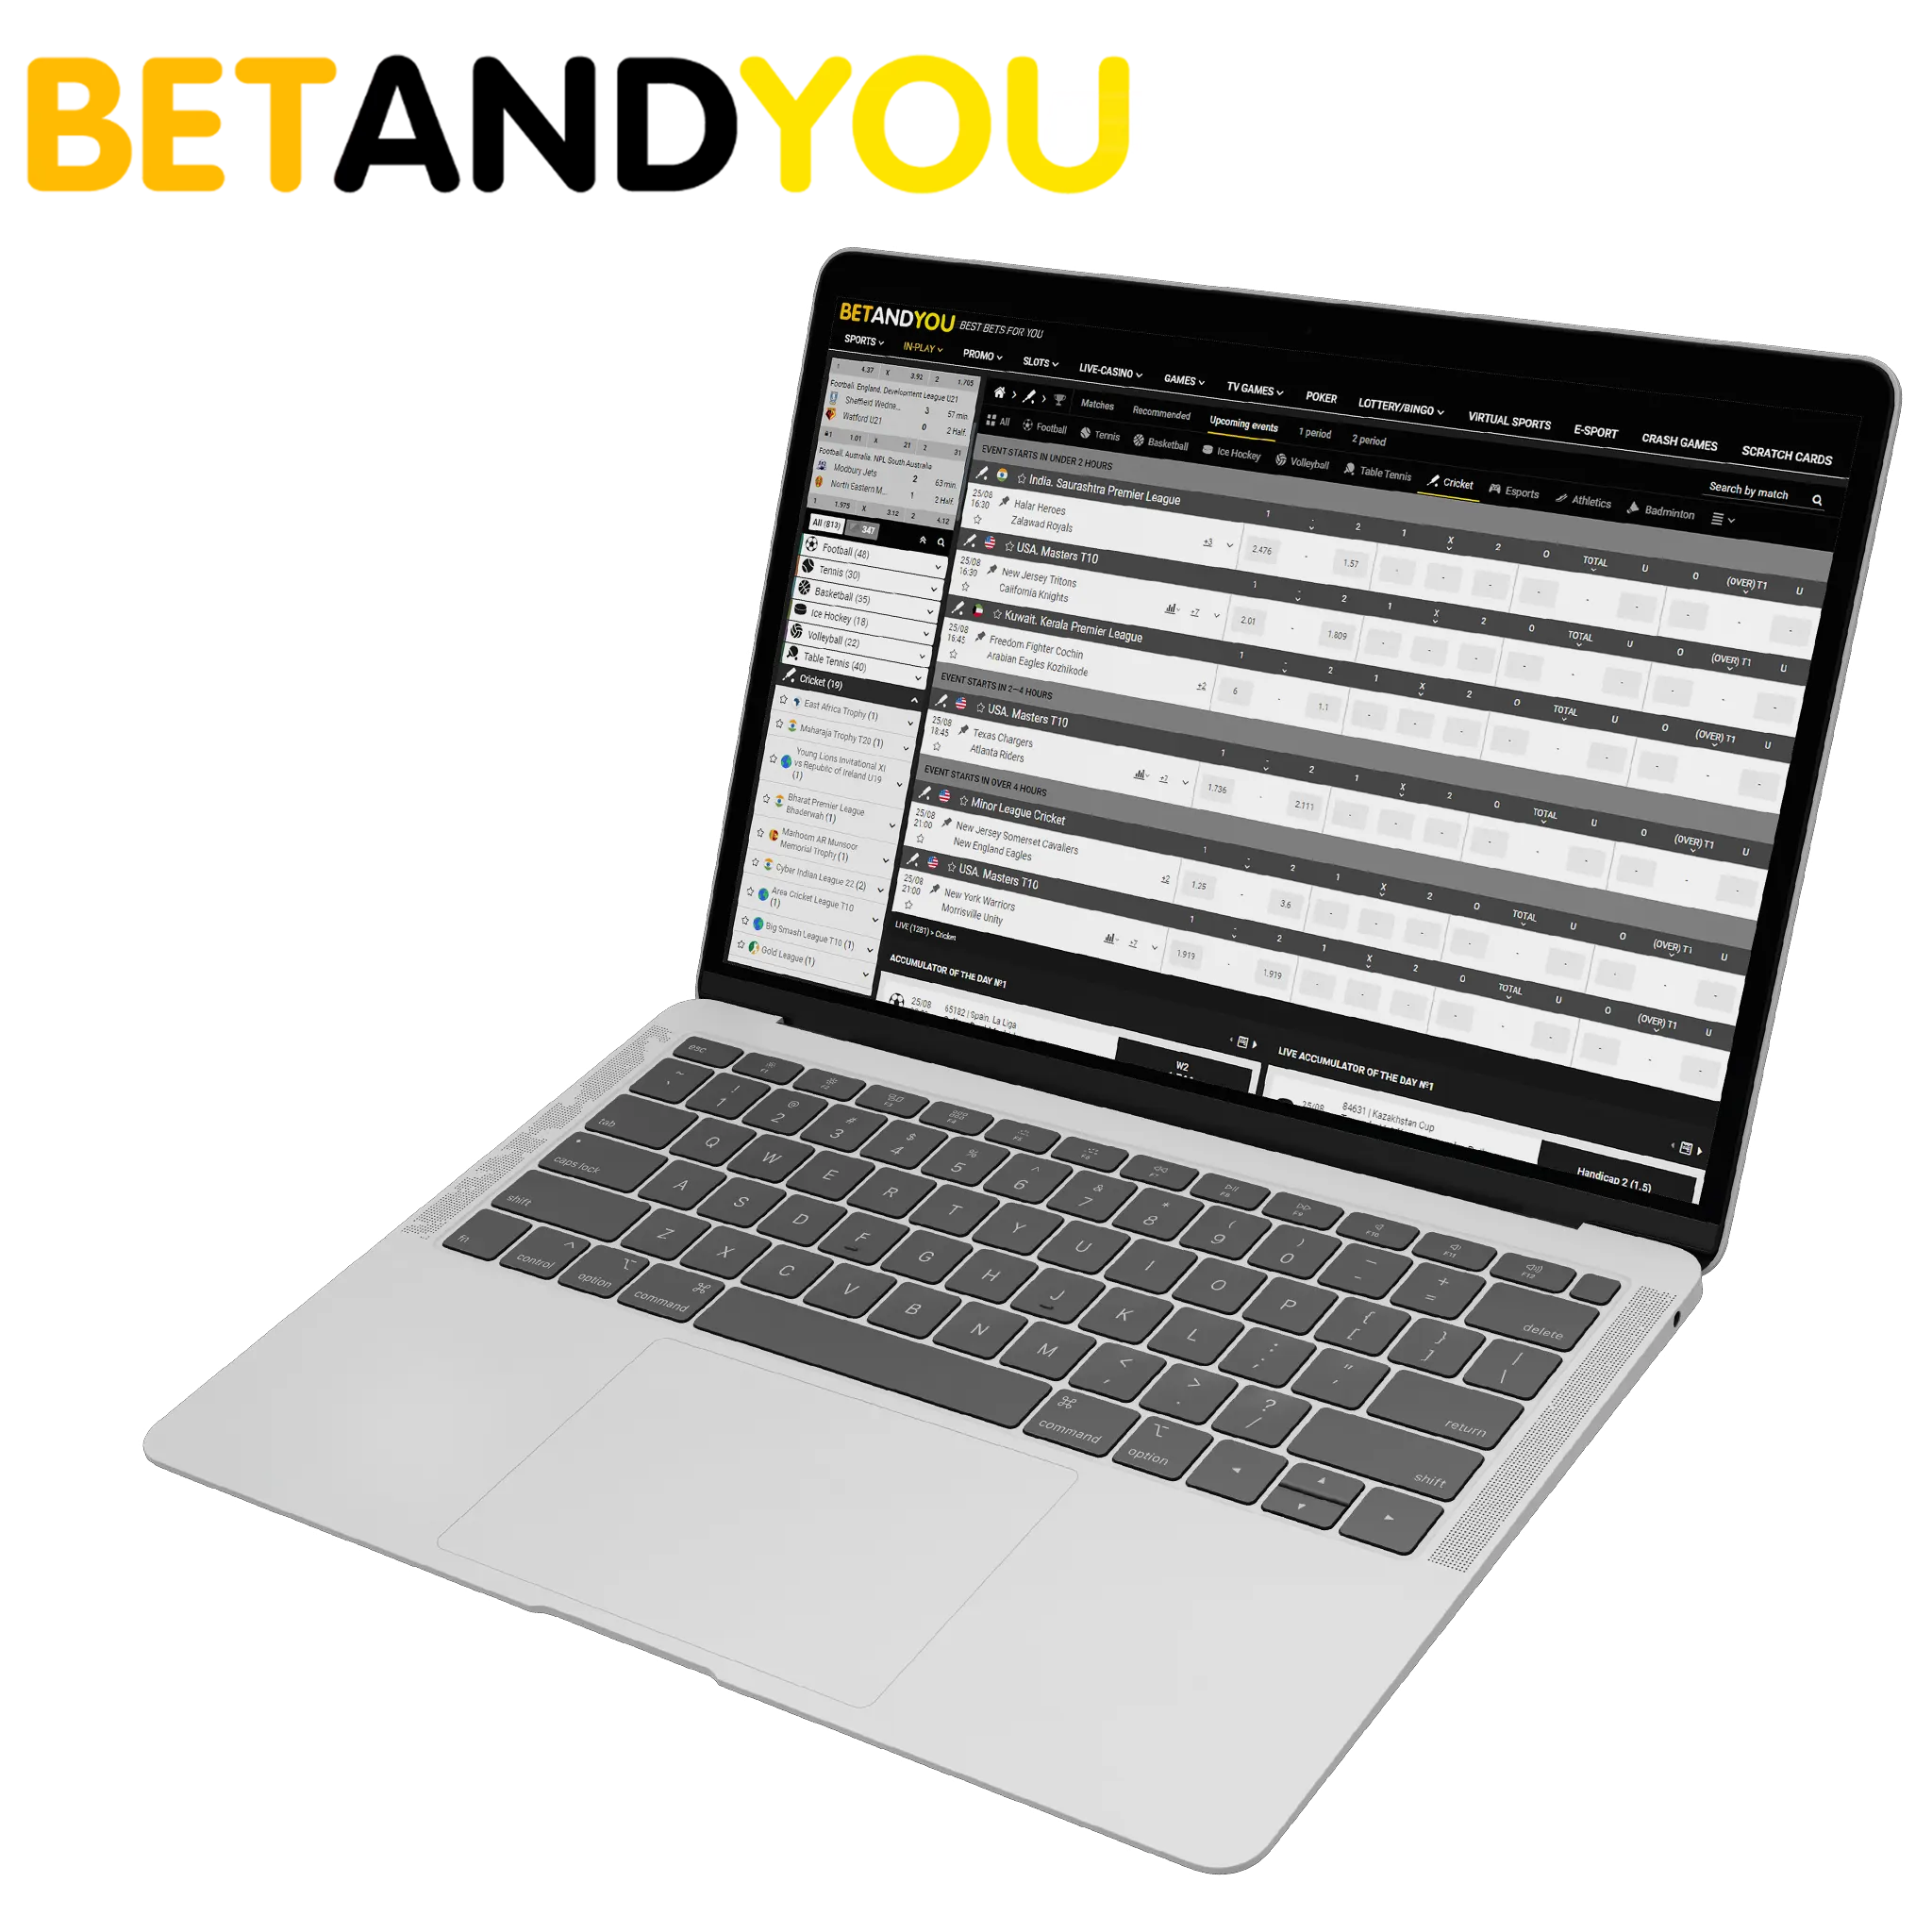 Betandyou is a trustworthy bookmaker providing betting on cricket.